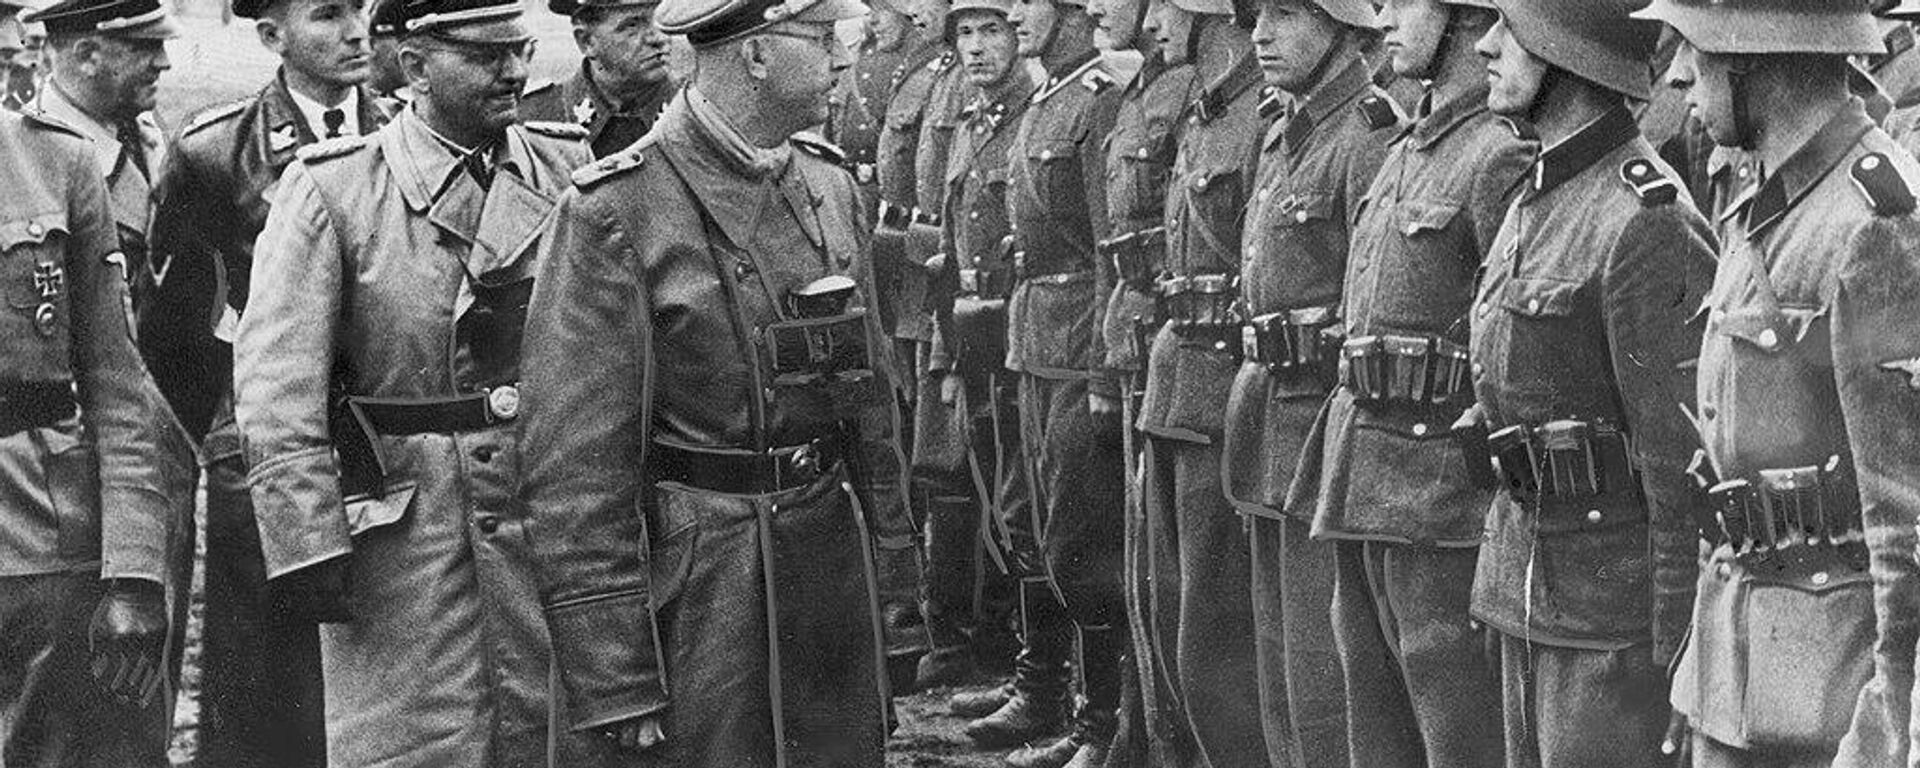 Reichsführer Heinrich Himmler (in the foreground) in the company of German officers in front of the unit of the 14th Grenadier Division of the Waffen SS Galizien. Otto von Wachter is visible among the officers. - Sputnik International, 1920, 25.09.2023